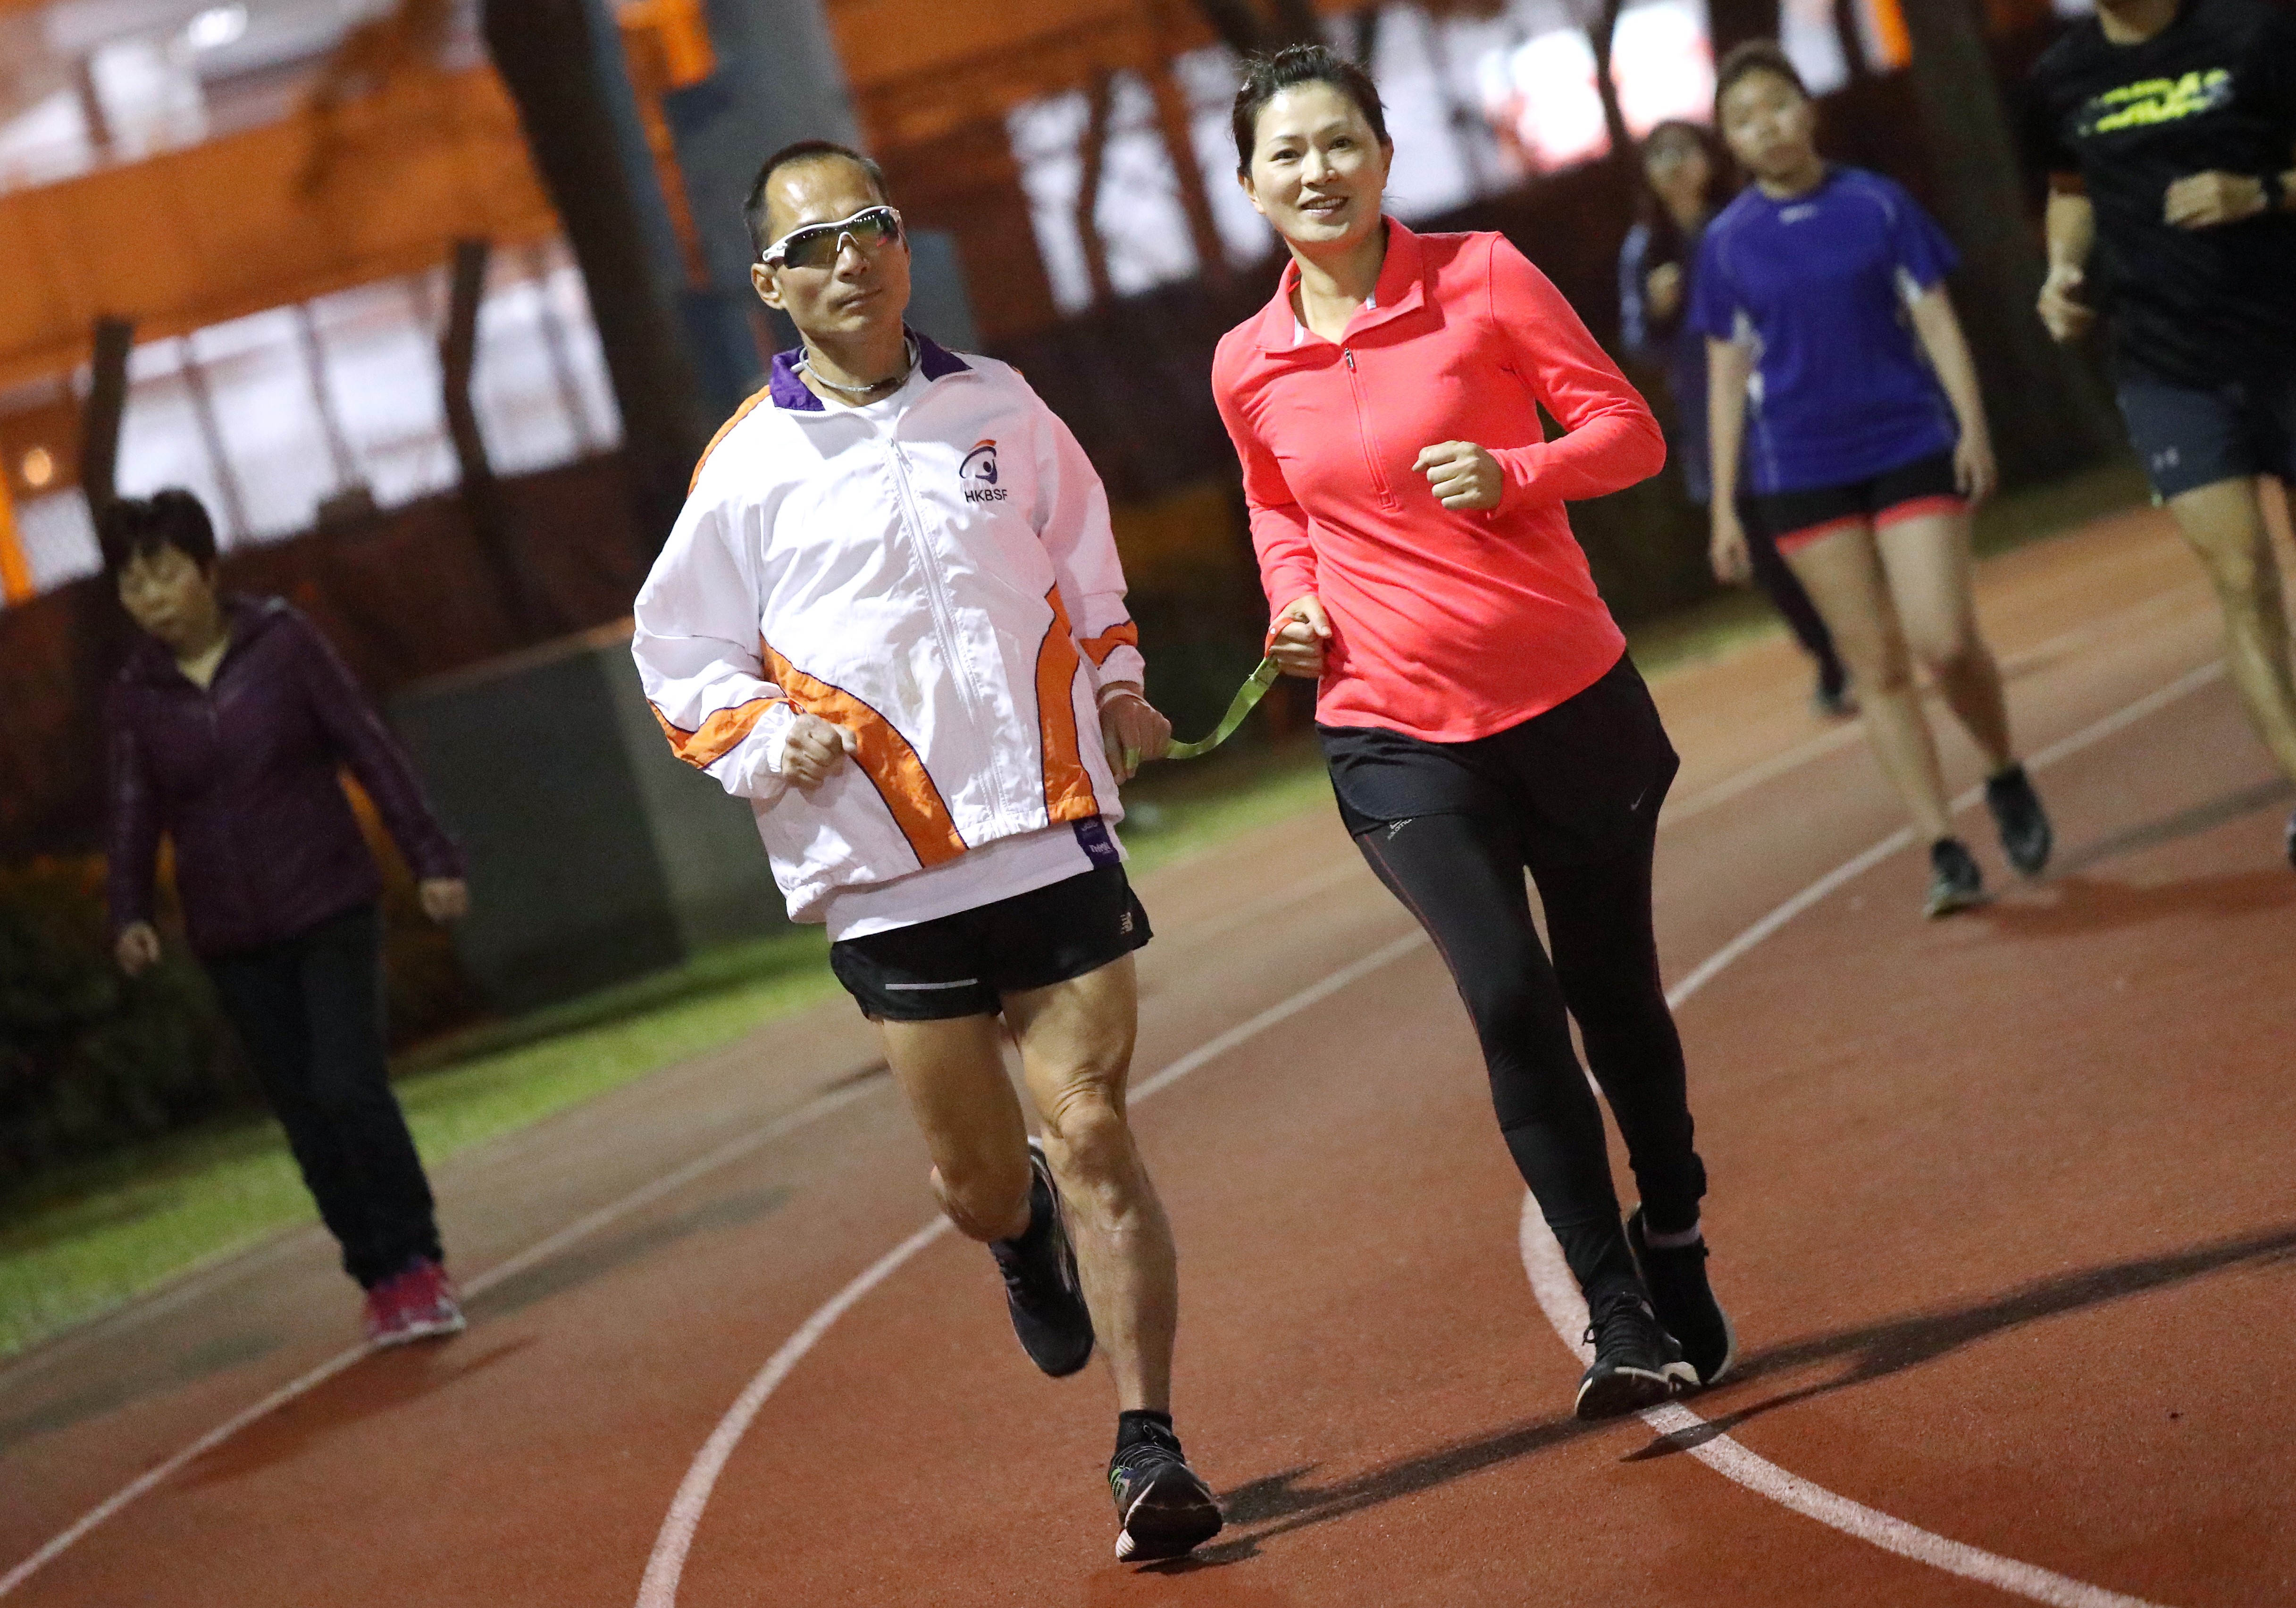 Blind runner Gary Leung Siu-wai and his guide runner Joyce Chong training for the Hong Kong Marathon. But April’s North Pole Marathon is a very different challenge. Photo: K.Y. Cheng